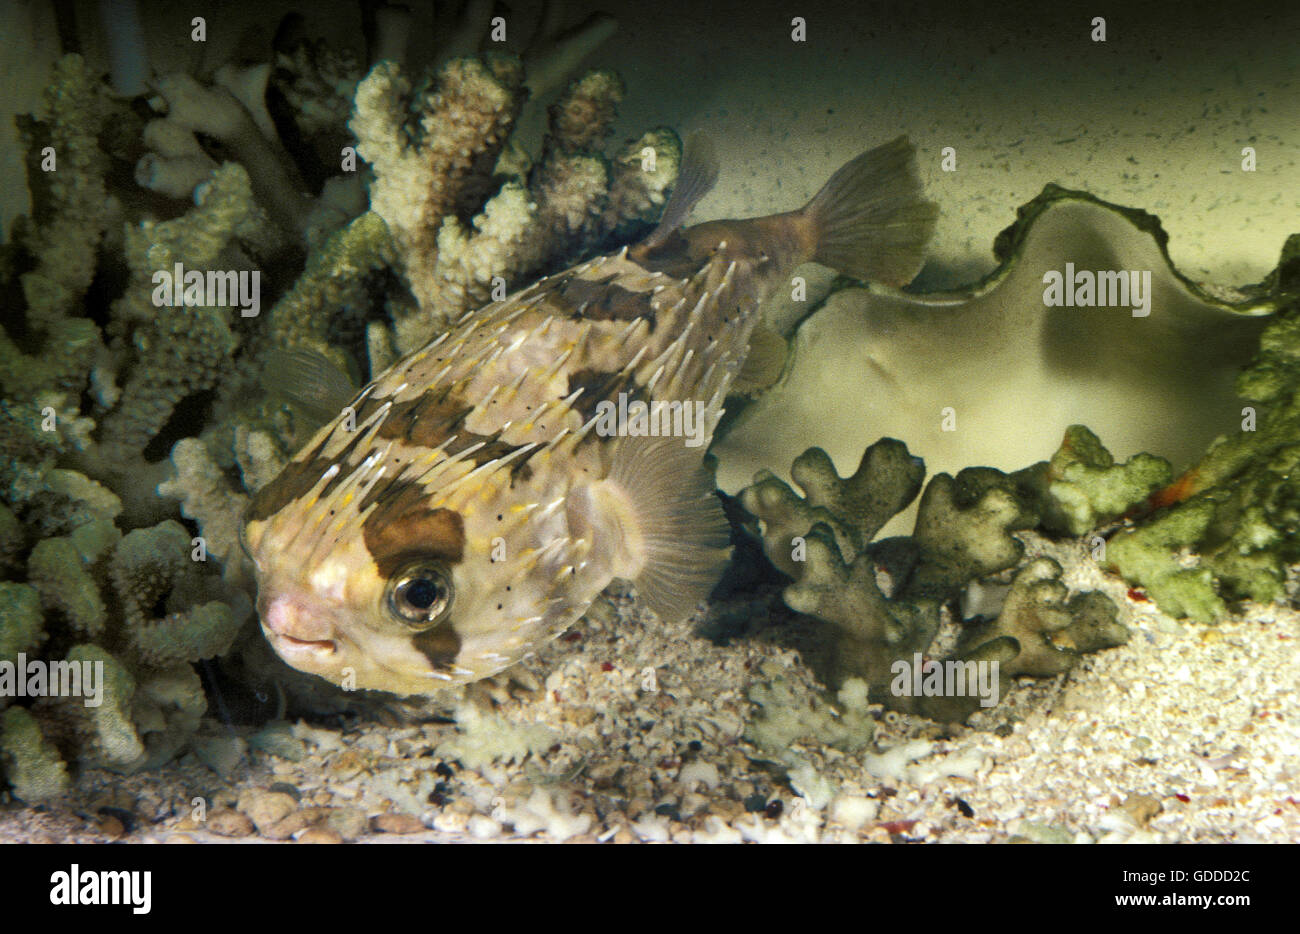 Black Spotted Porcupine Fish, diodon hystrix, Adult near Coral Stock Photo